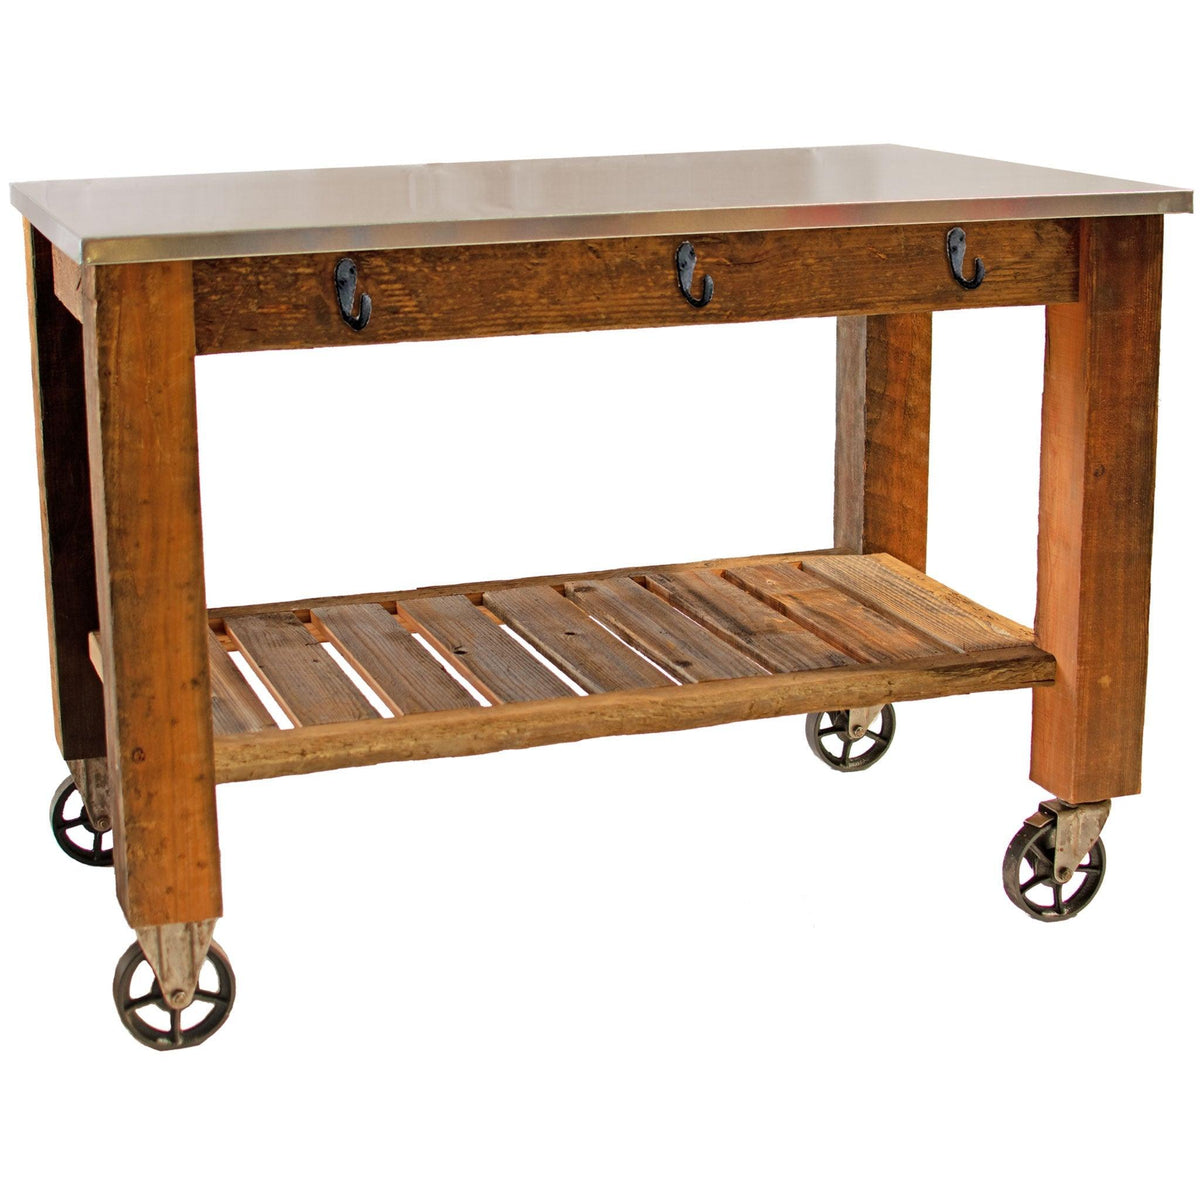 Lee Display's Redwood Potting Table Rolling Cart with 6in Vintage Casters and Hardware on sale now at leedisplay.com